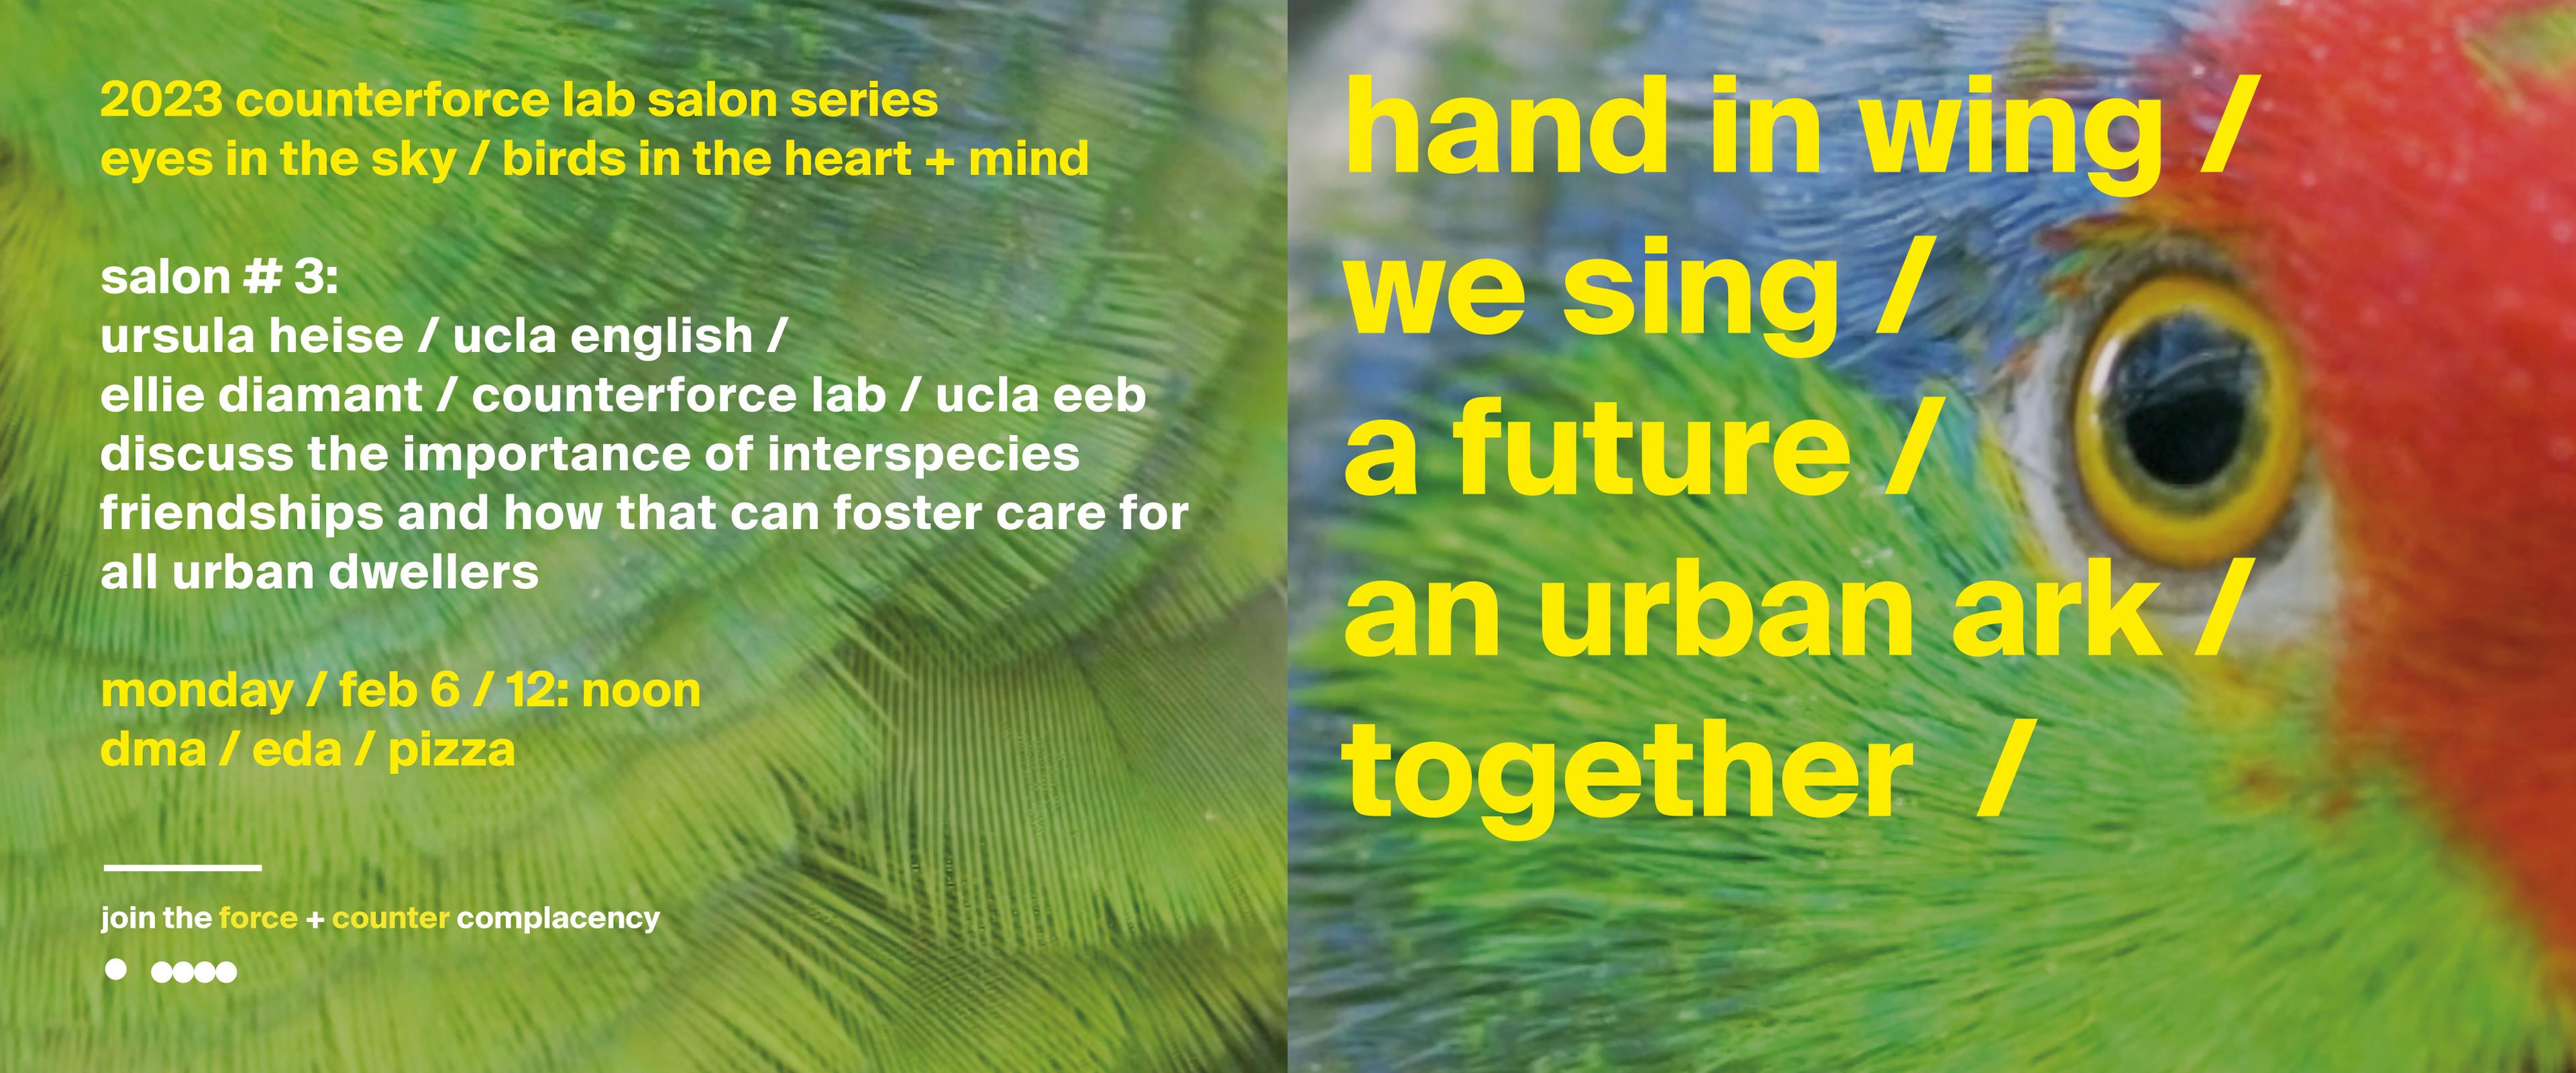 text that reads "2023 counterforce lab salon series eyes in the sky/ birds in the heart + mind salon # 3: ursula heise / ucla english / ellie diamant / counterforce lab / ucla eeb discuss the importance of interspecies friendships and how that can foster 